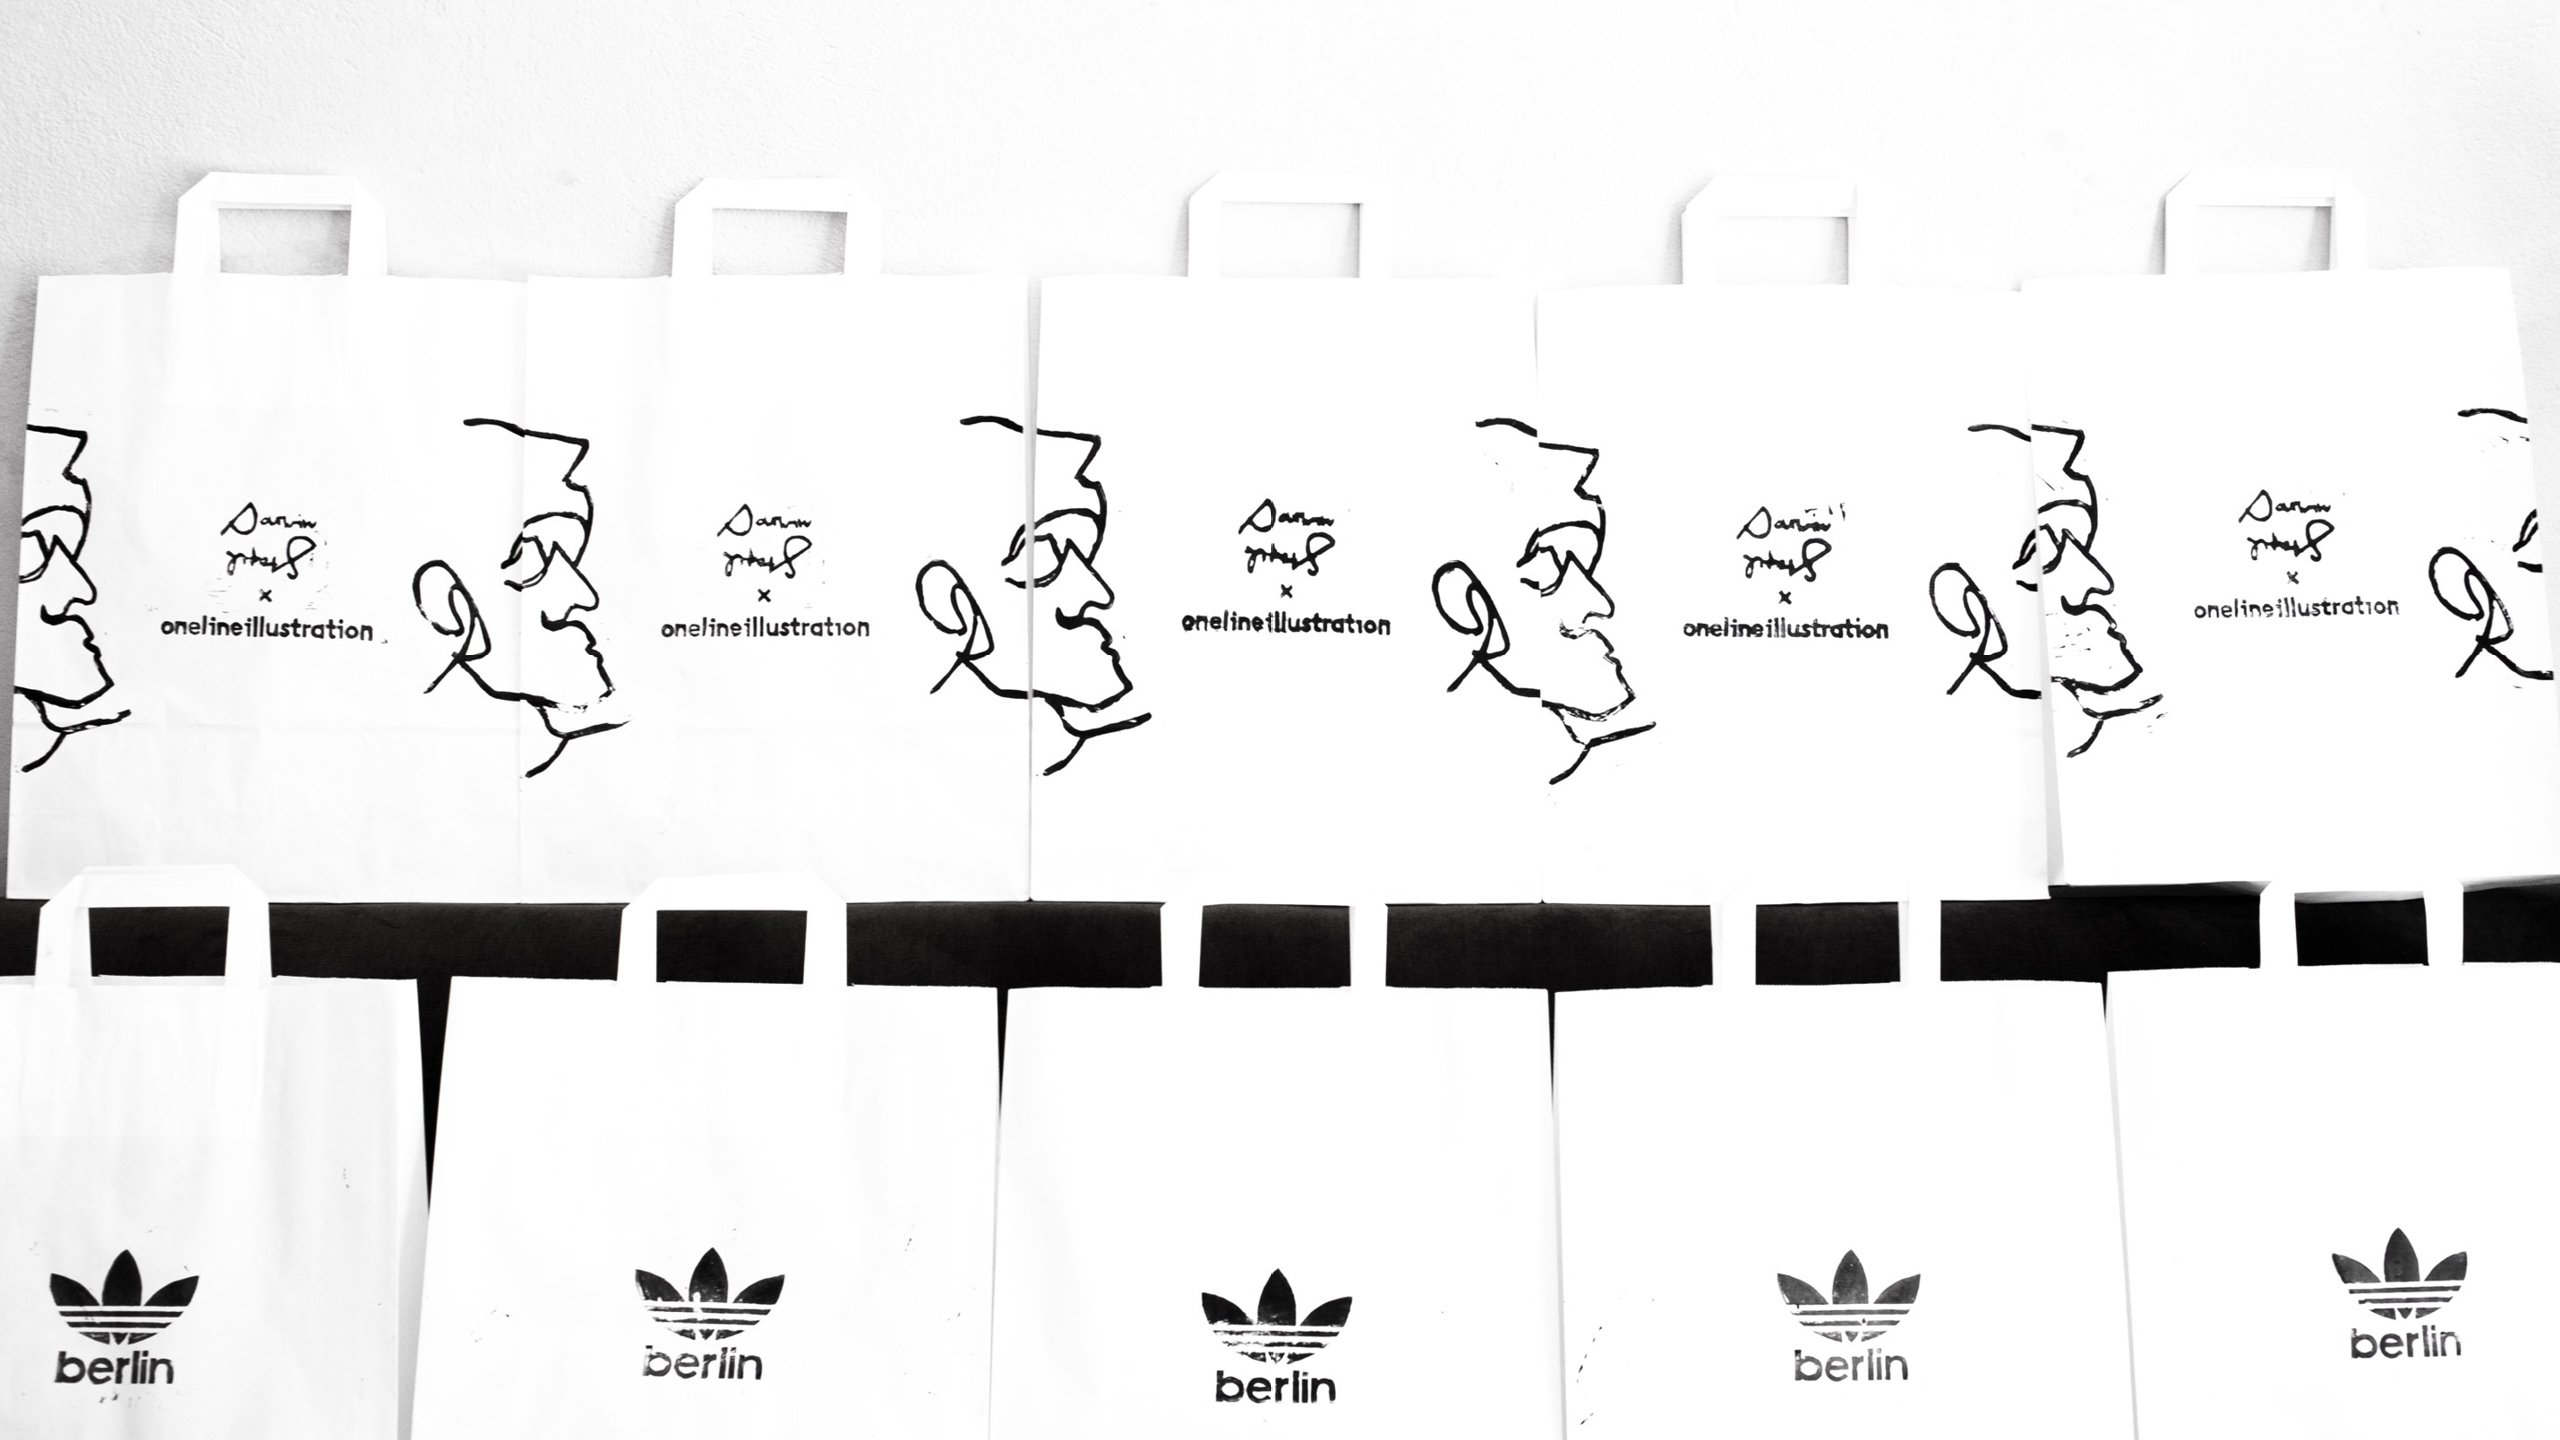 Darwin Stapel; one line illustration; onelineillustration; adidas; adidas Deutschland; adidas originals; adidas Berlin; adidas Flagship Store Berlin Mitte; comissioned; studio for visual concepts; 